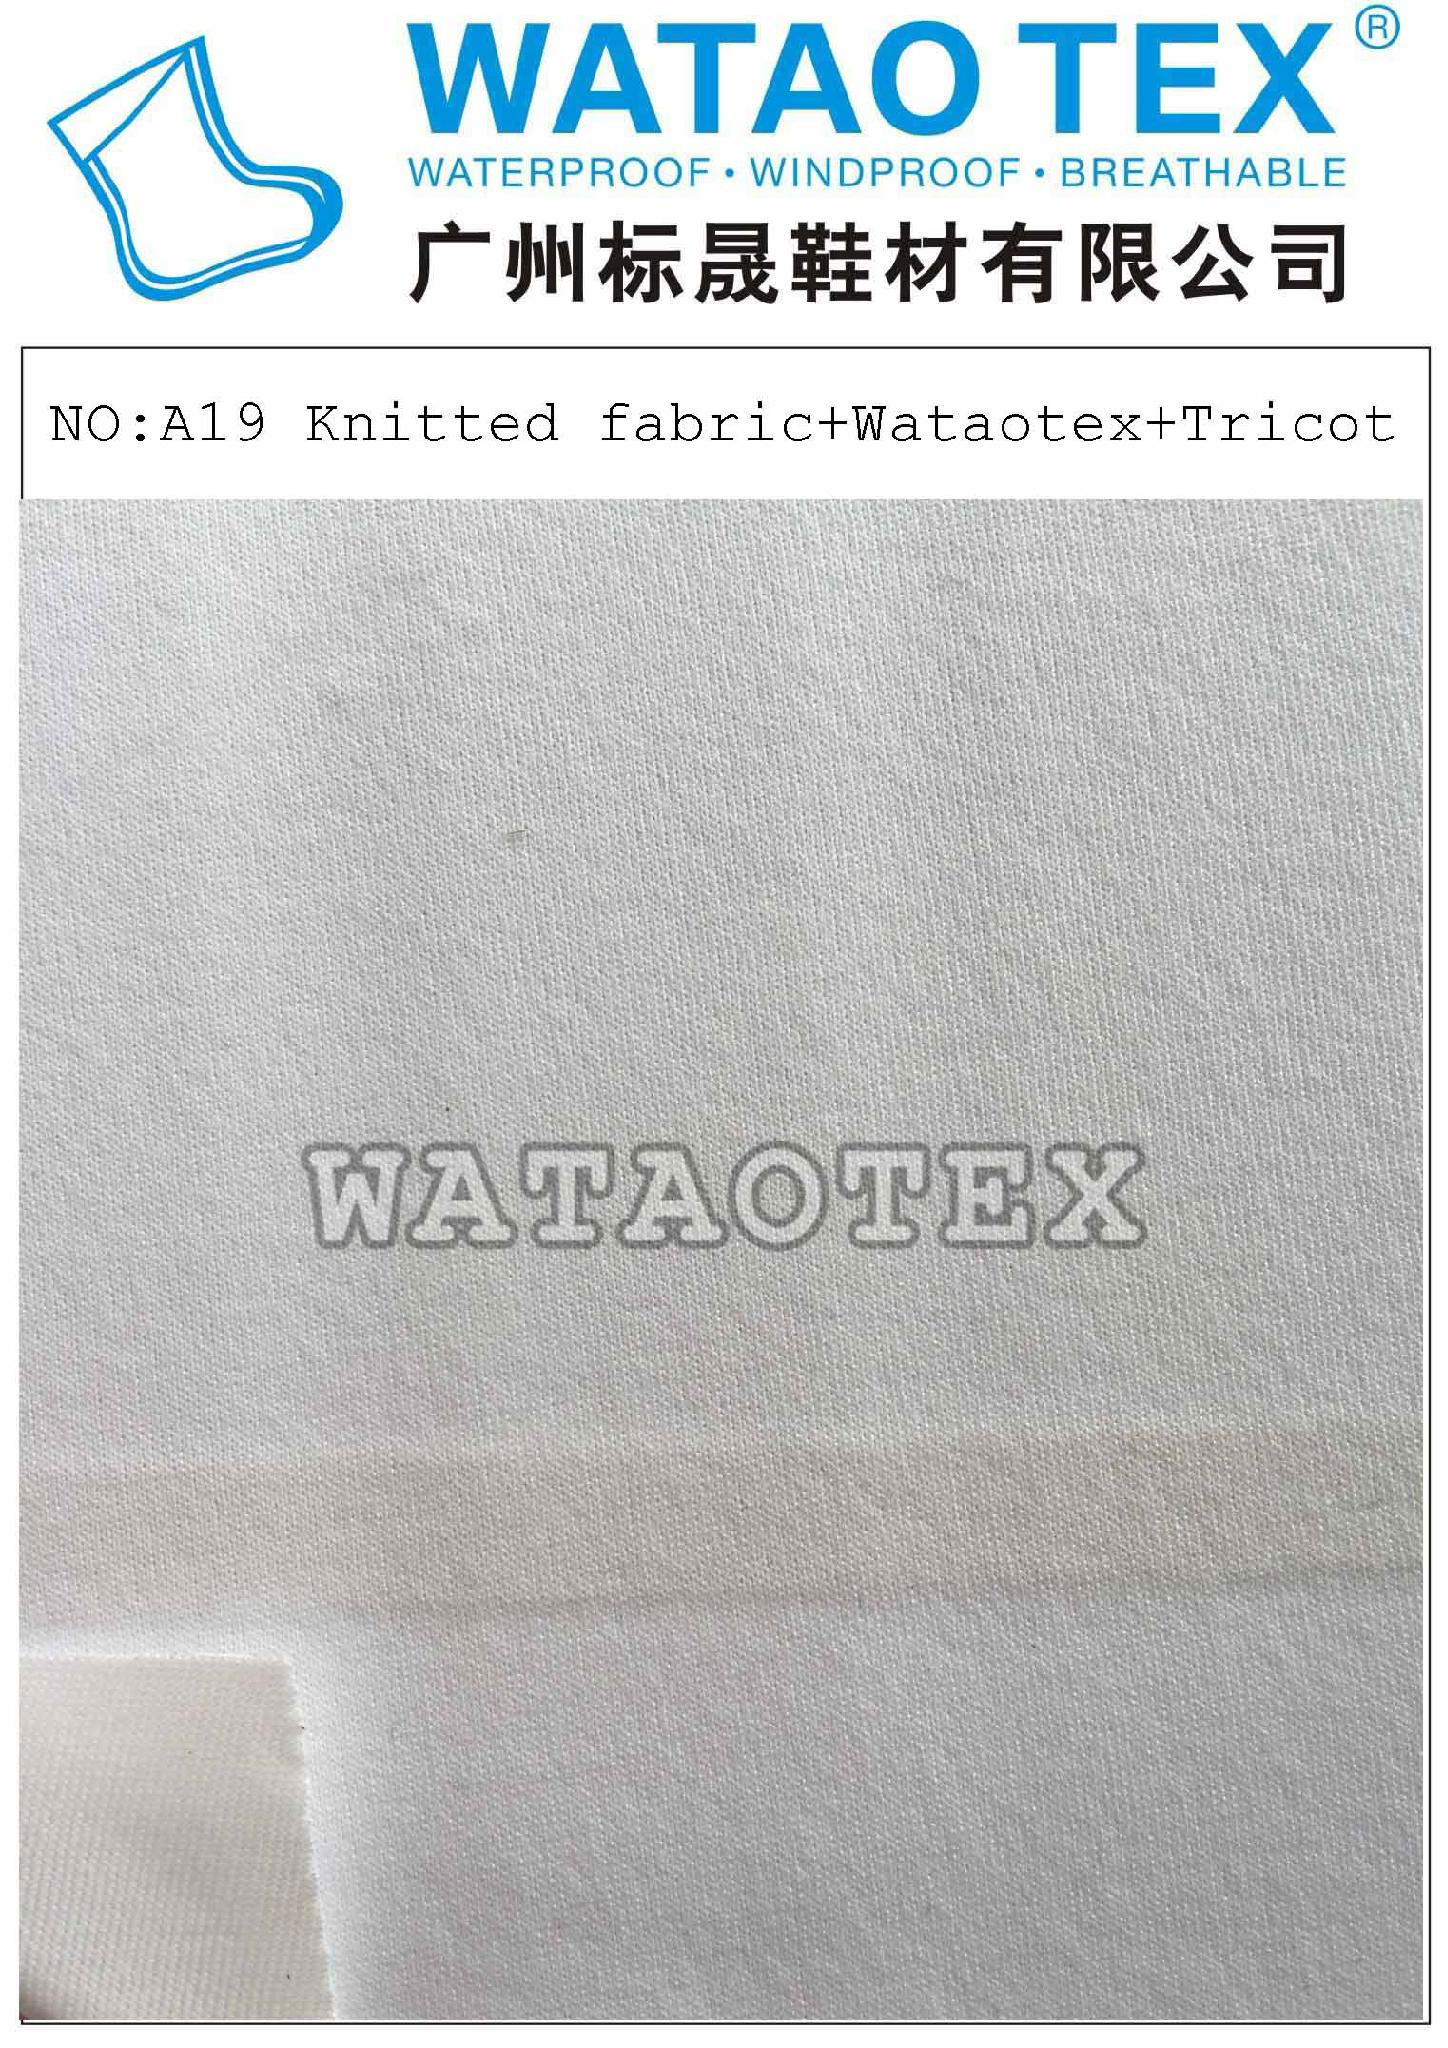 Waterproof knitted fabrics for shoes manufactured in Guangzhou